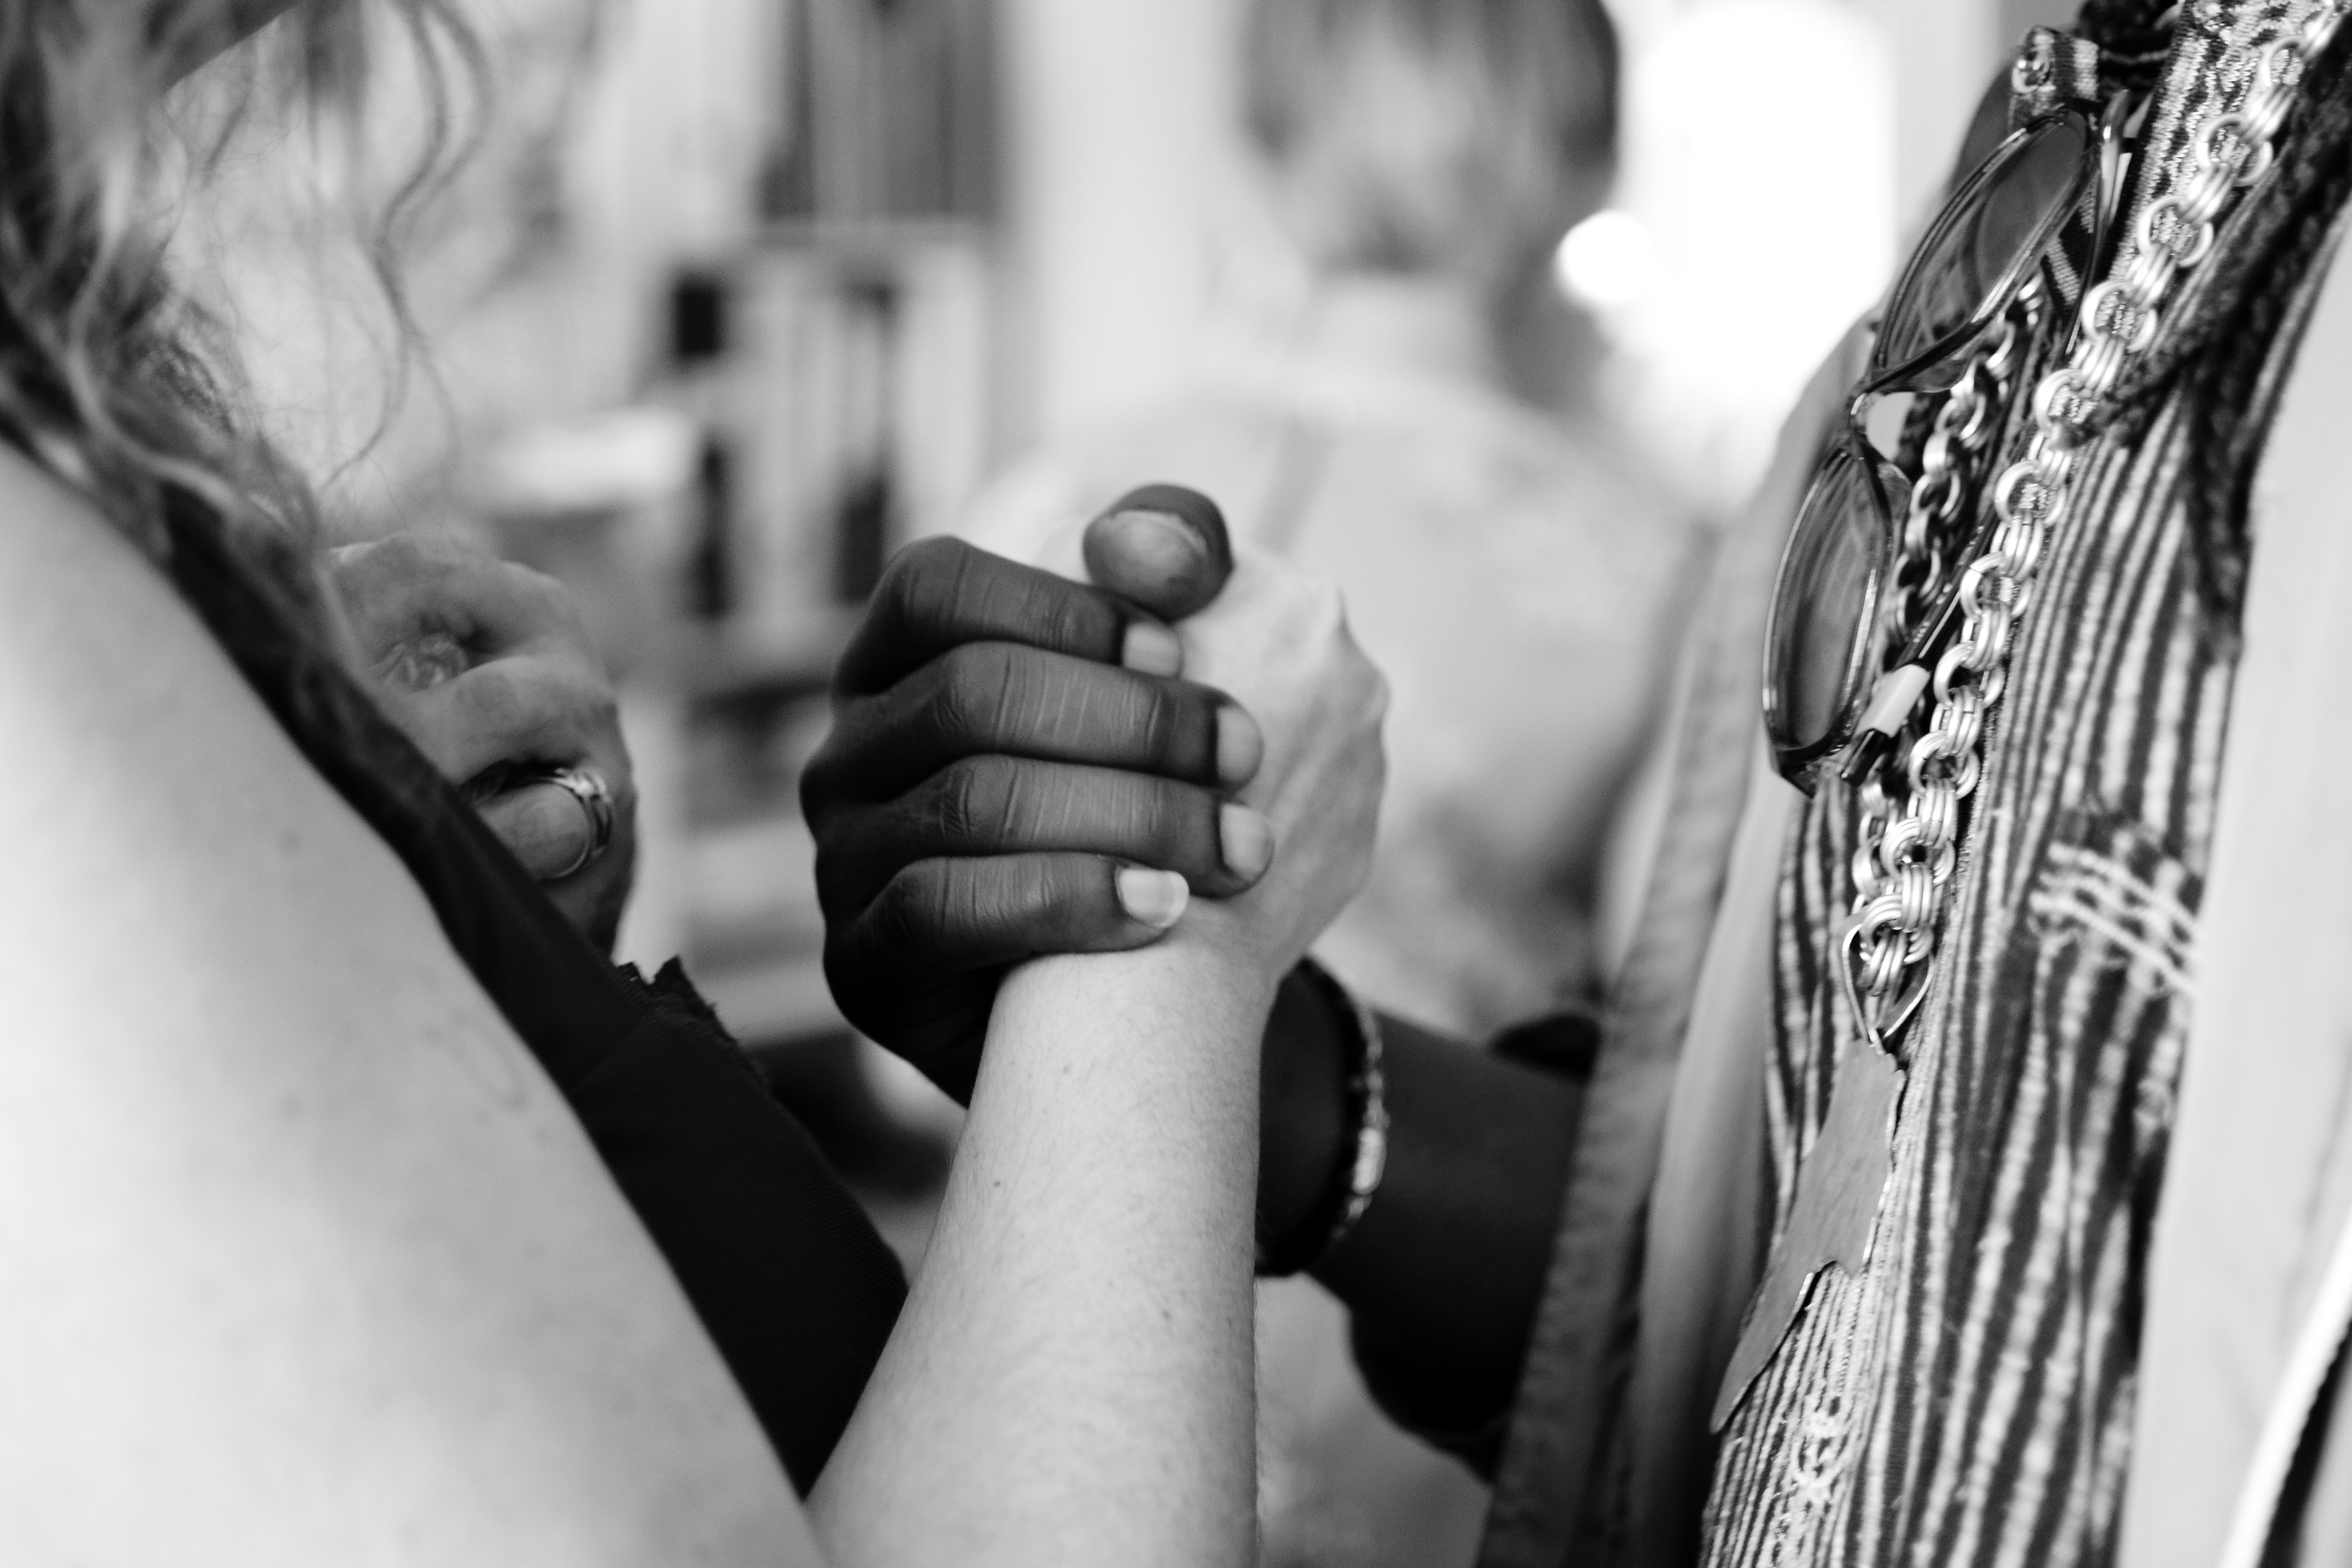 Black and white photography of a white person and a black person holding each others' hands to represent diversity and inclusion